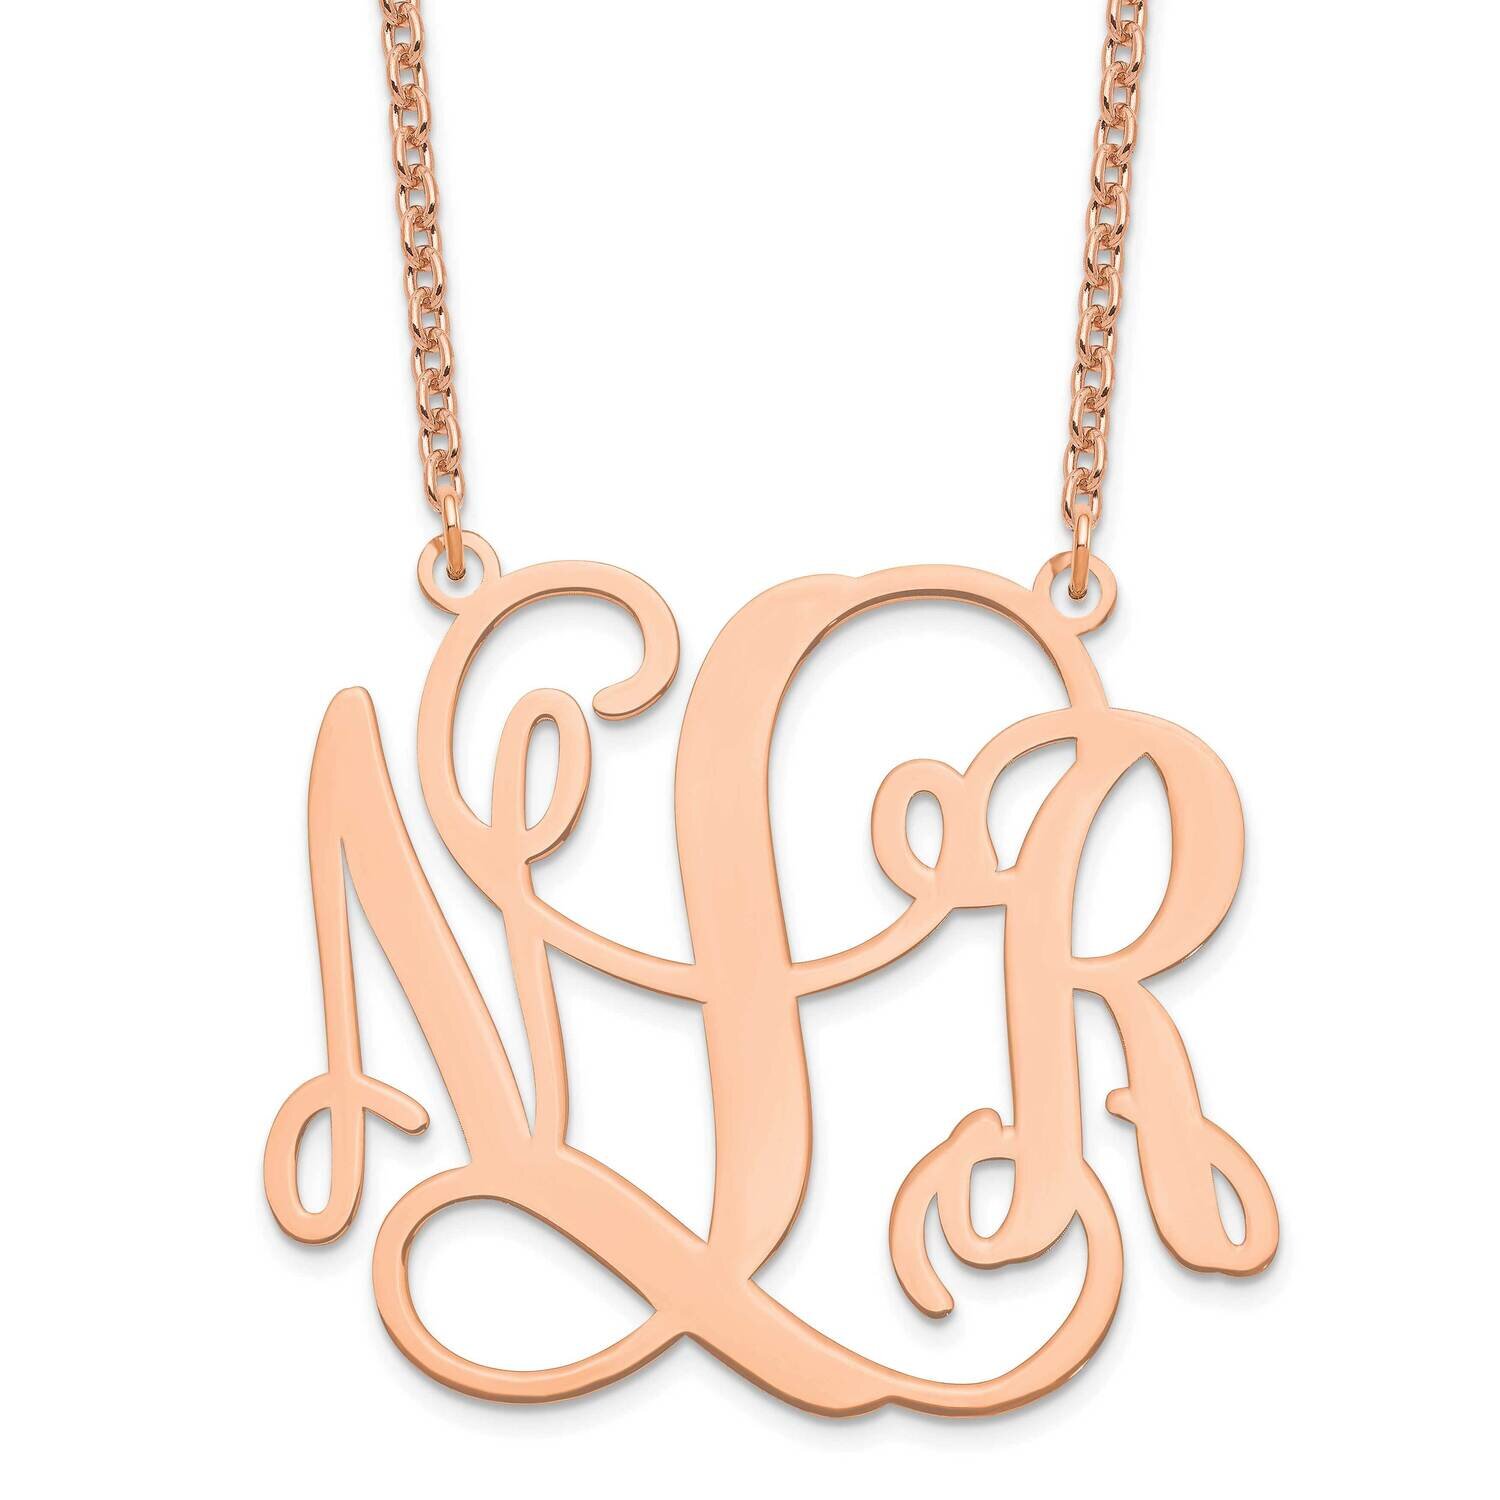 Large Polished Cut Out Monogram Necklace Sterling Silver Rose-plated XNA502RP